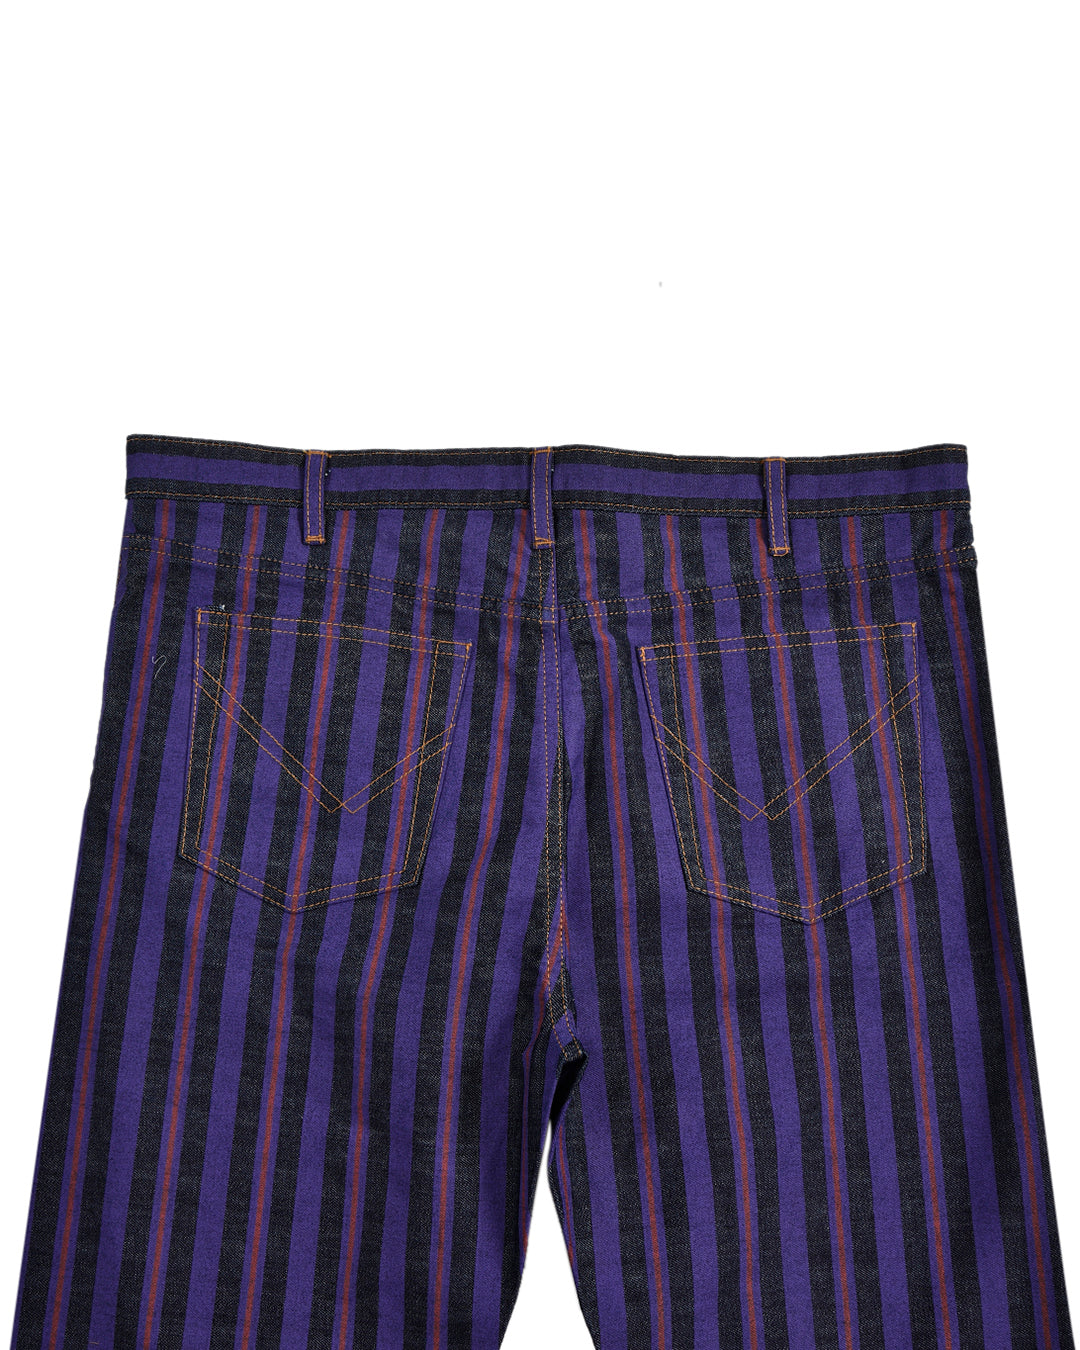 Back view of custom denim jeans for men by Luxire with purple stripes